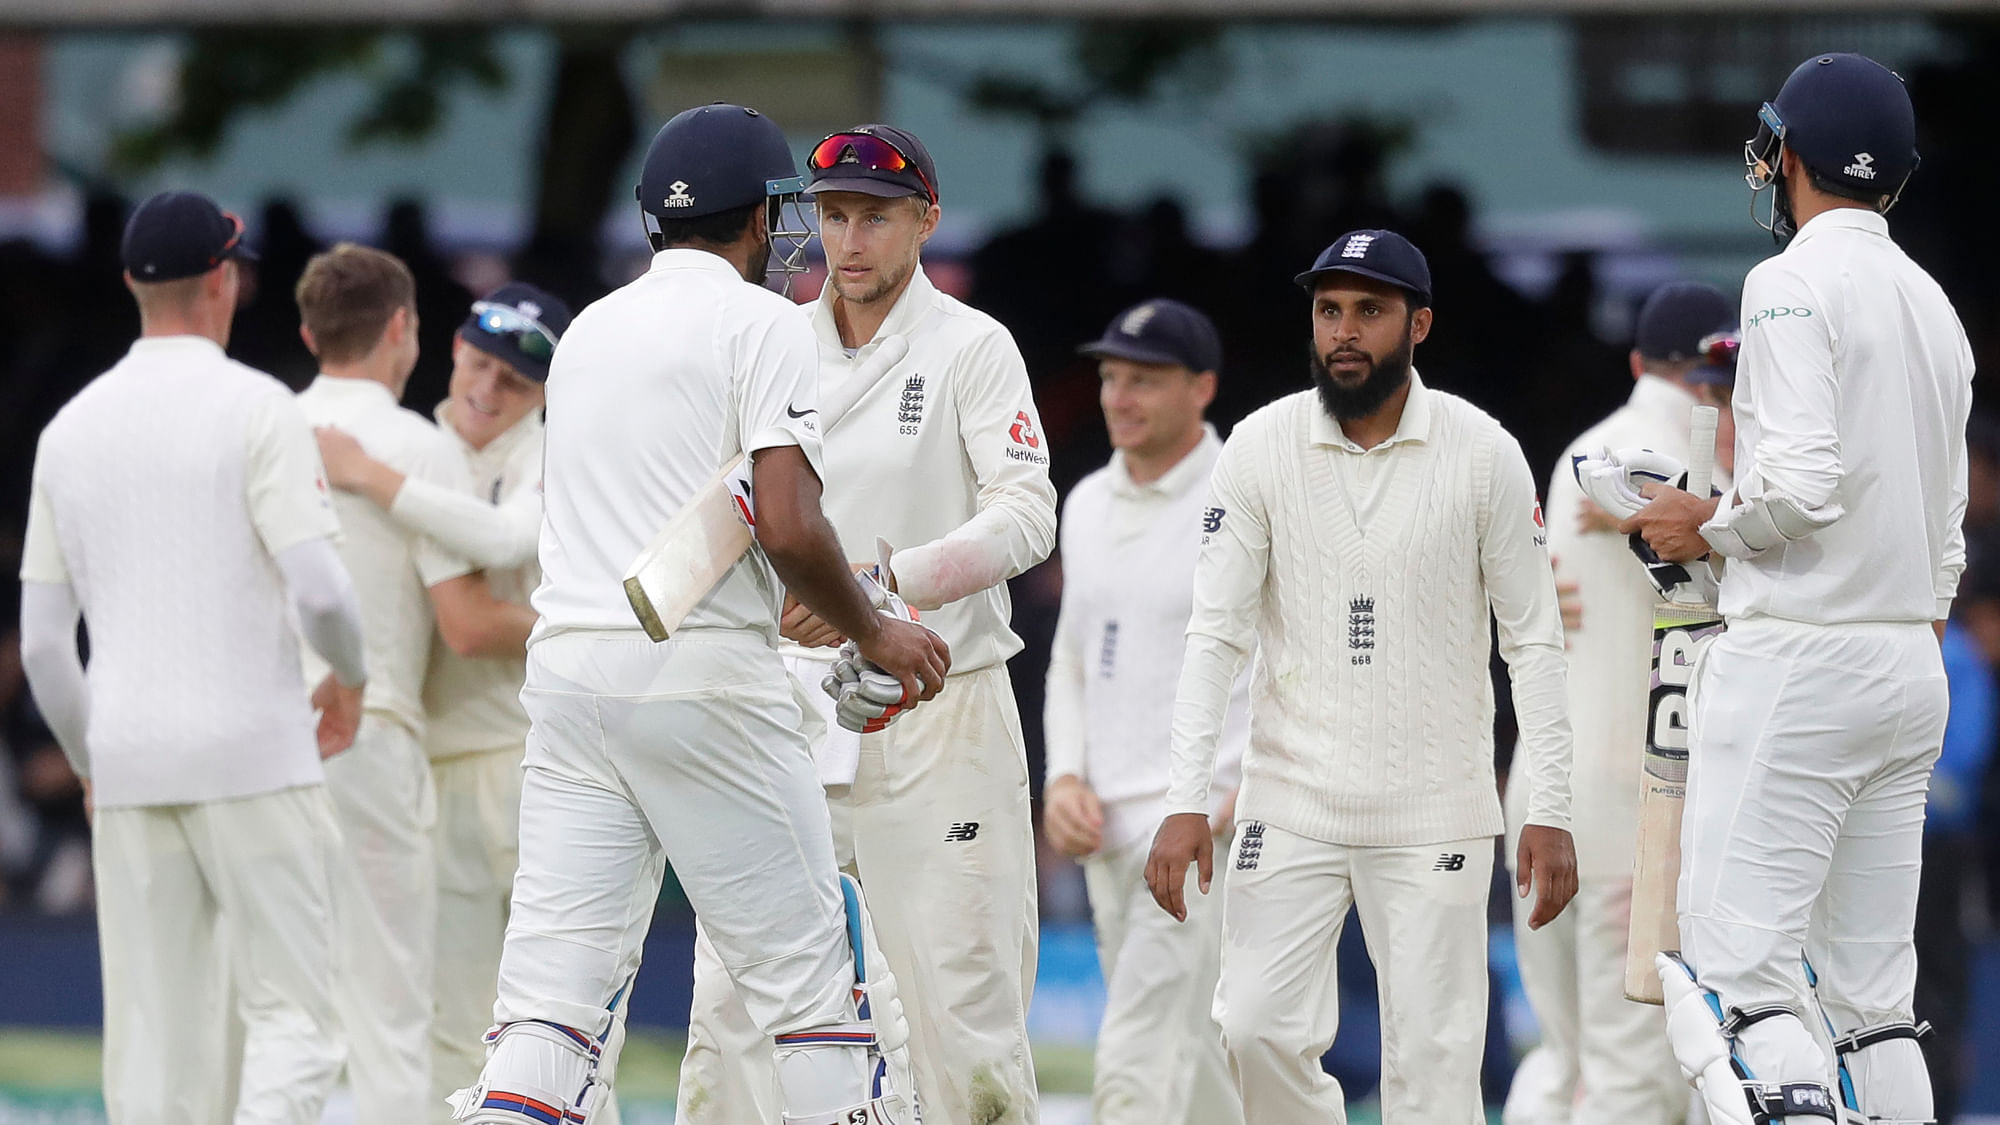 Players shake hands after England bowl India out for 130 during the fourth day of the second test match between England and India at Lord’s cricket ground in London, Sunday, Aug. 12, 2018.